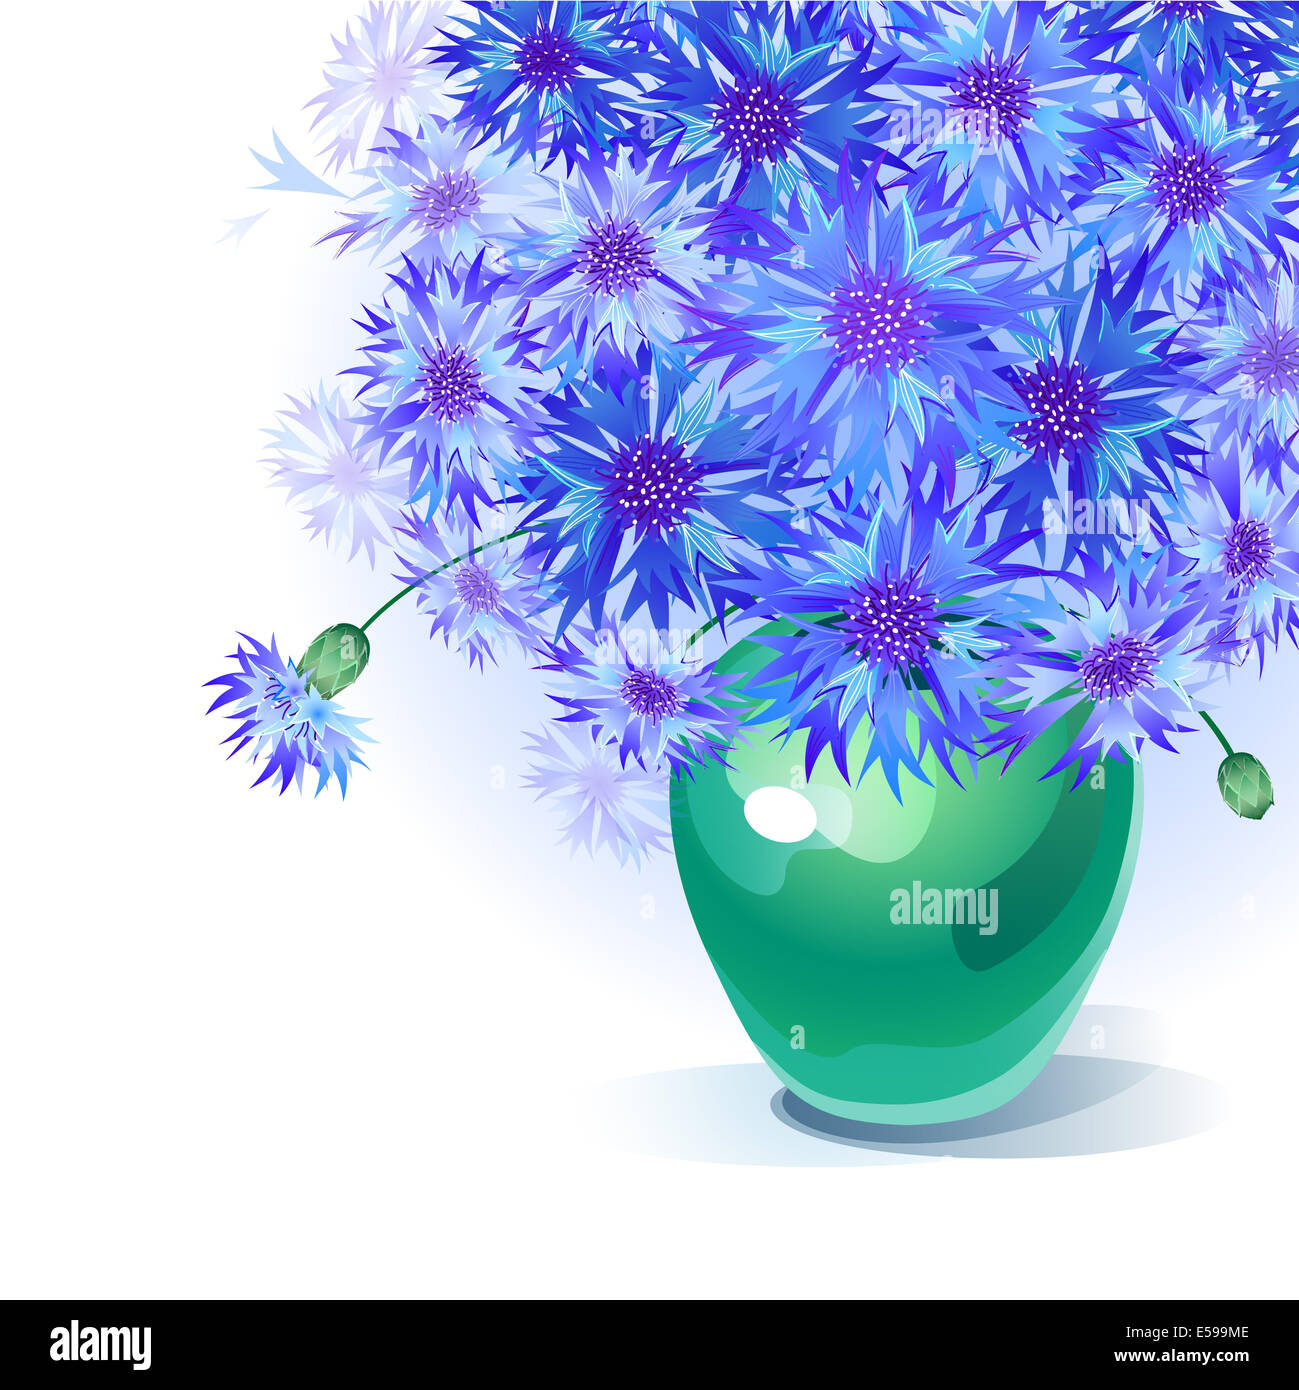 Greeting card with gentle bluebottle bouquet in green vase Stock Photo